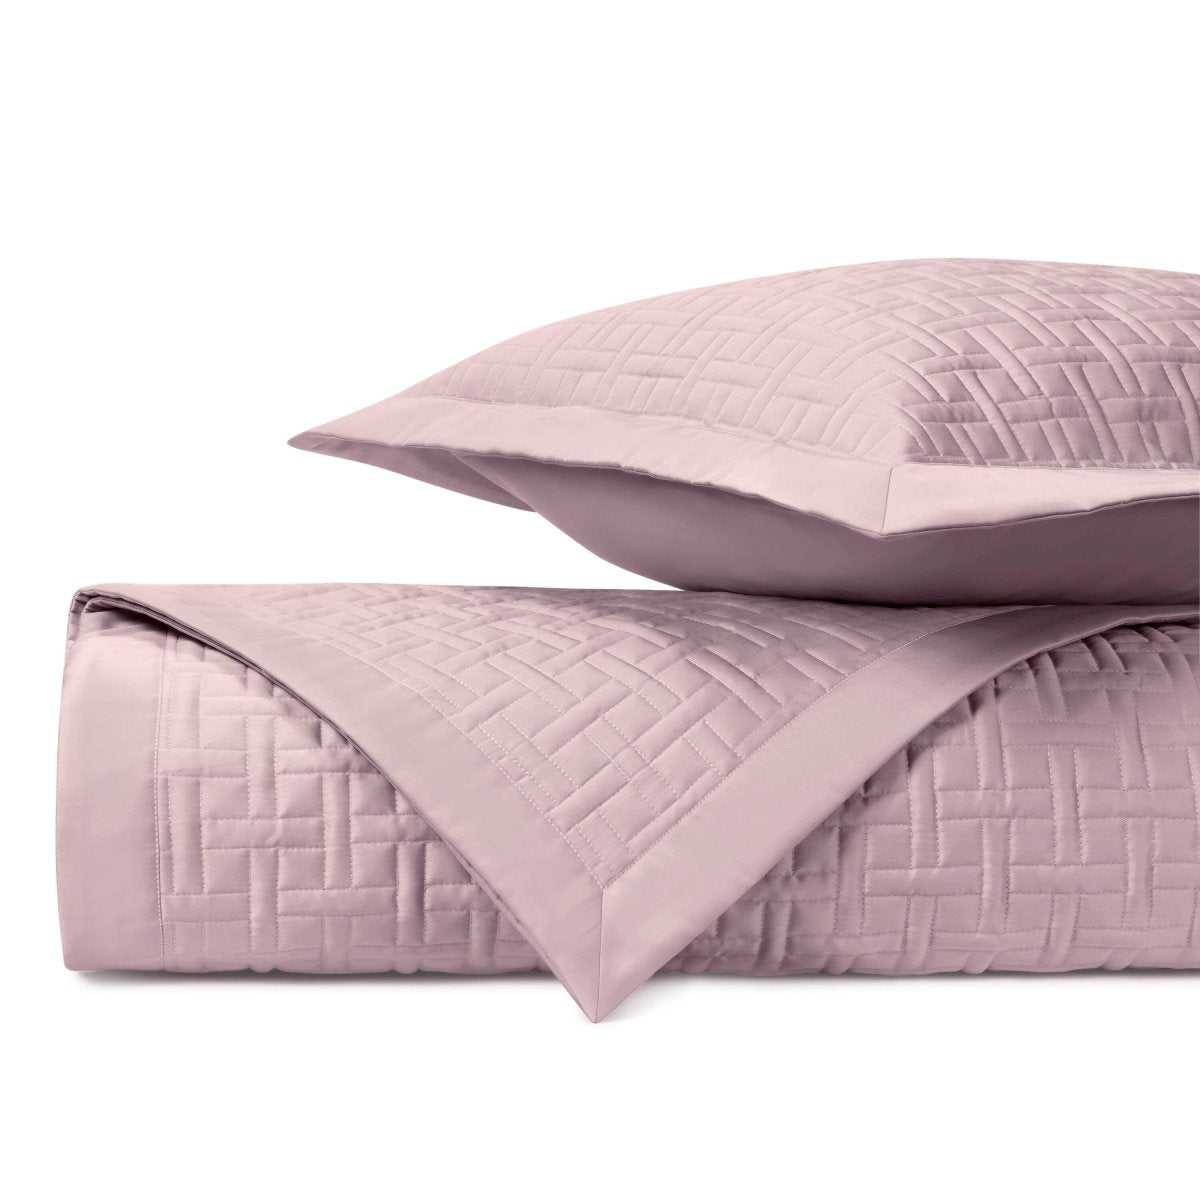 PARQUET Quilted Coverlet in Incenso Lavender by Home Treasures at Fig Linens and Home